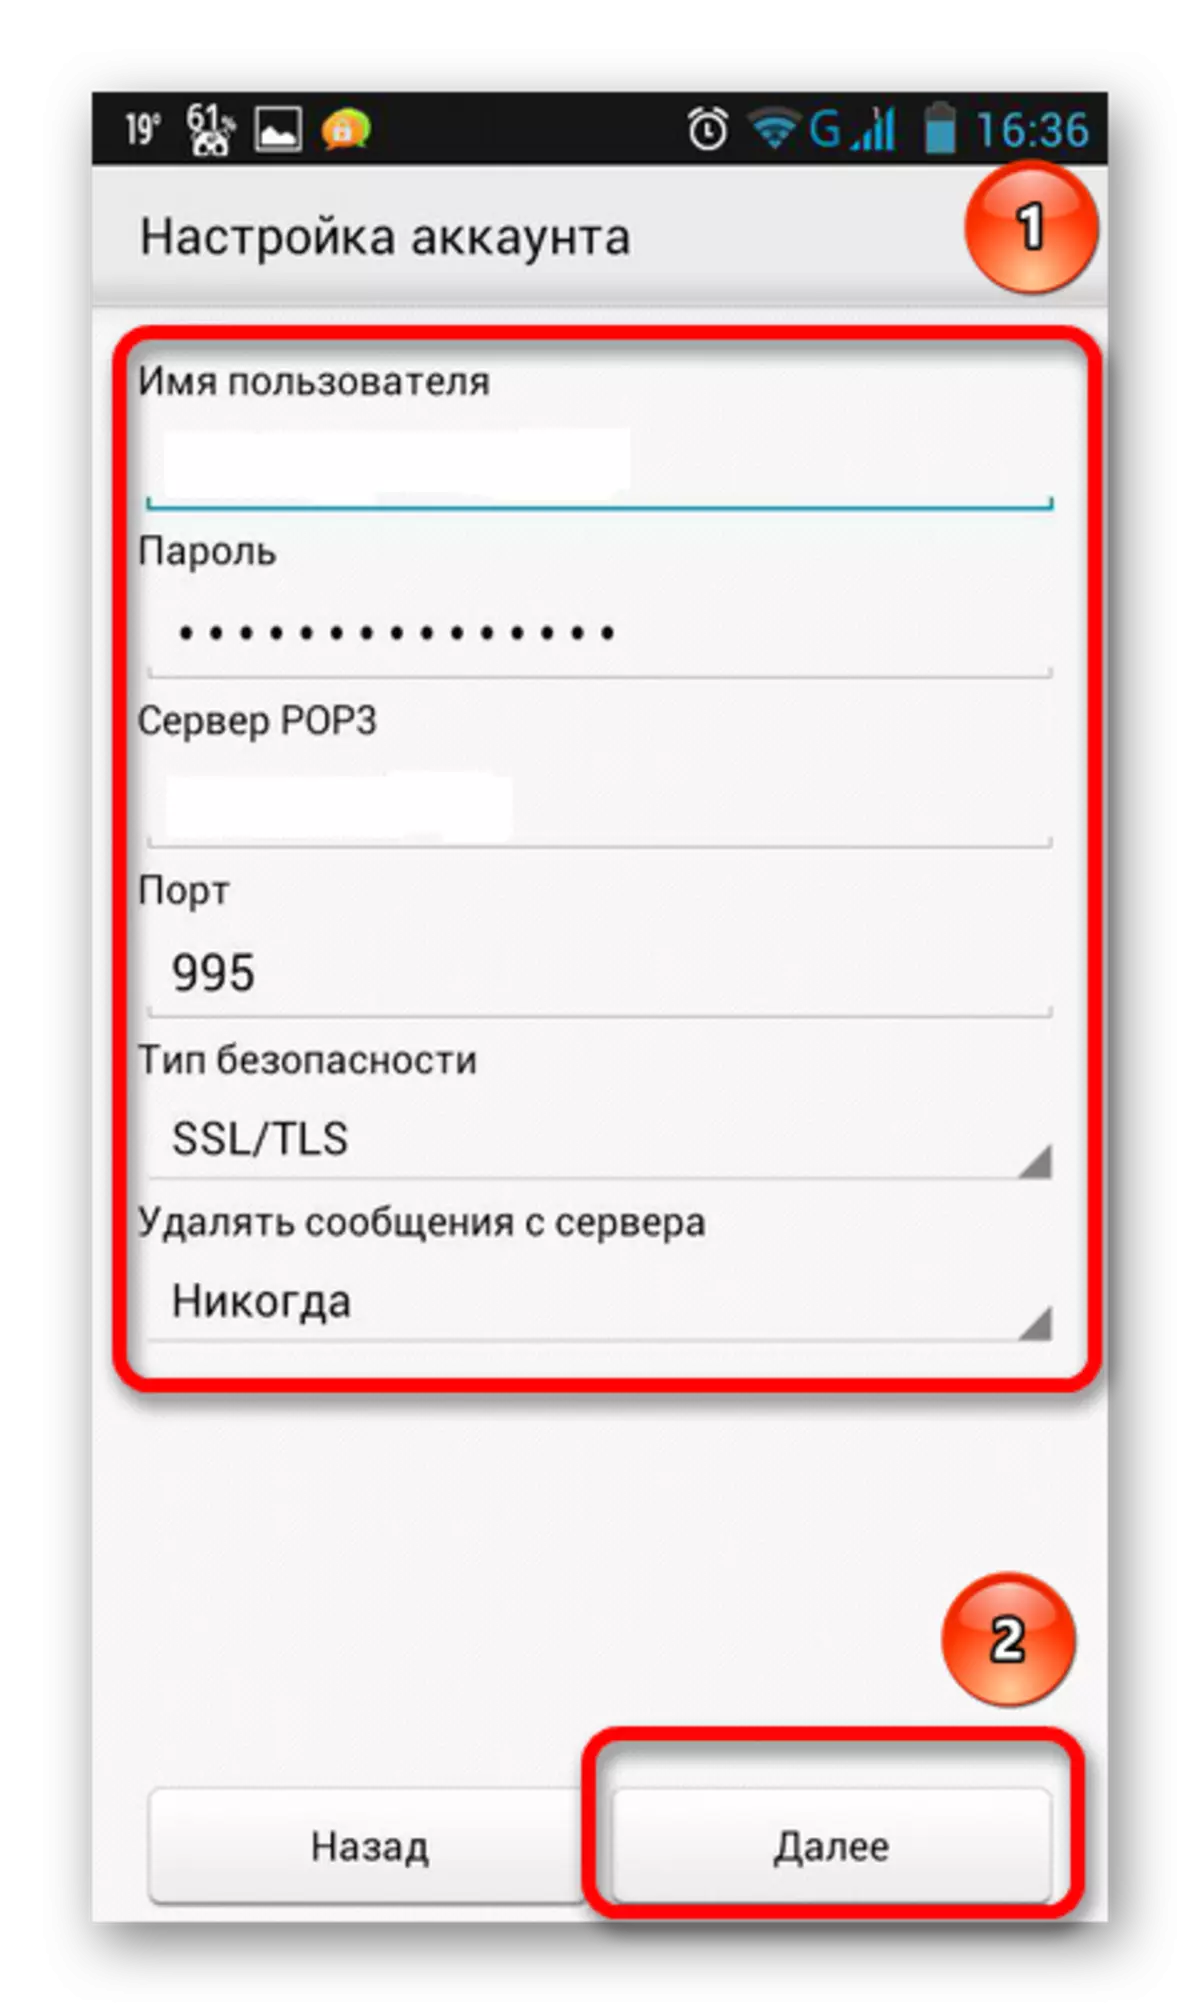 Enter password and name on Yandex mail